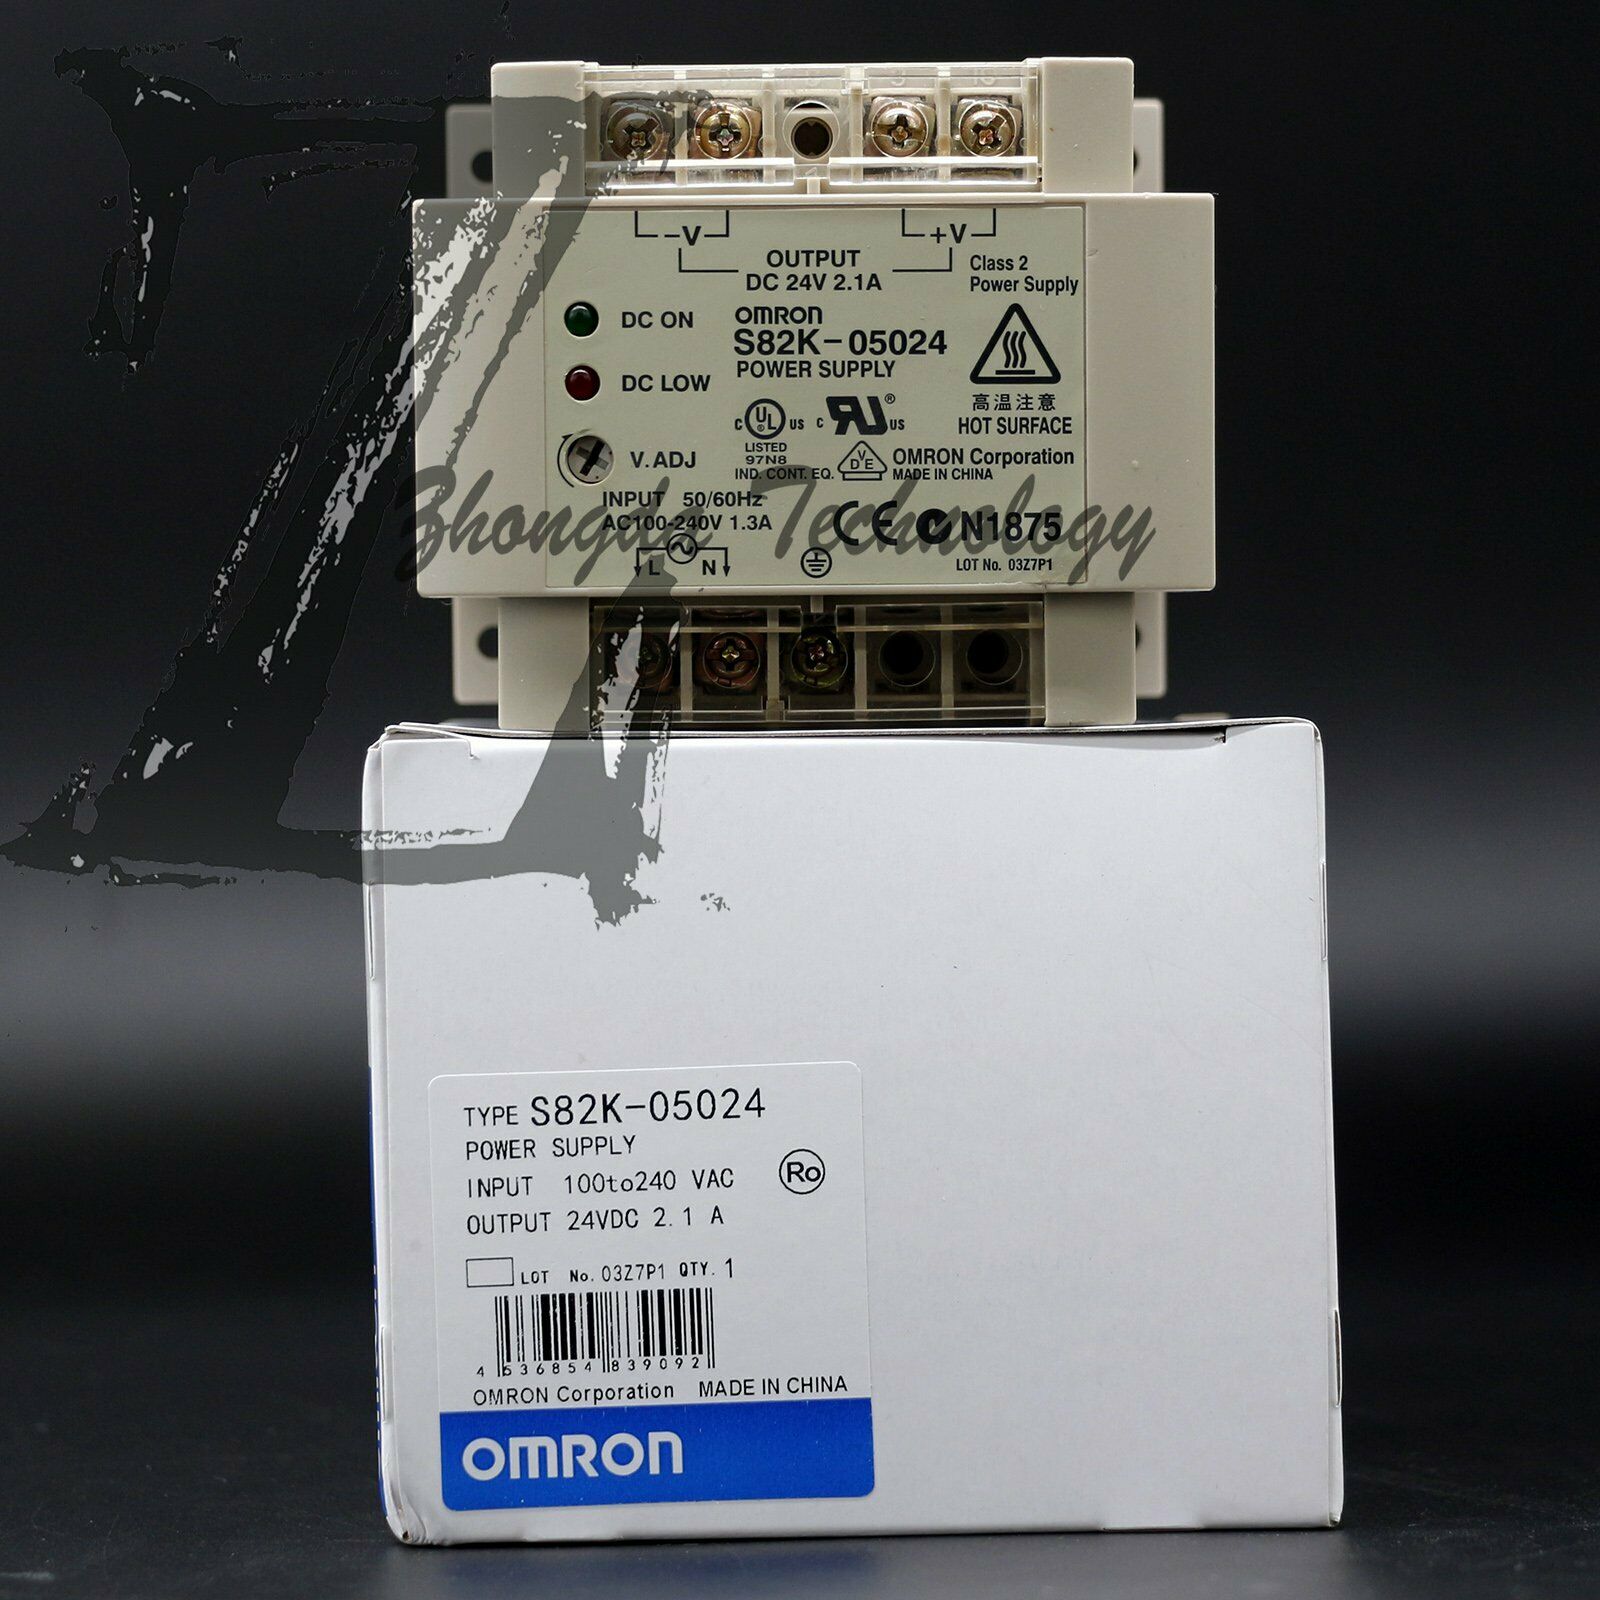 1PC NEW OMRON Switching Power Supply S82K-05024 24VDC One year warranty KOEED $0-100, 90%, import_2020_10_10_031751, OMRON, PLC, S82K